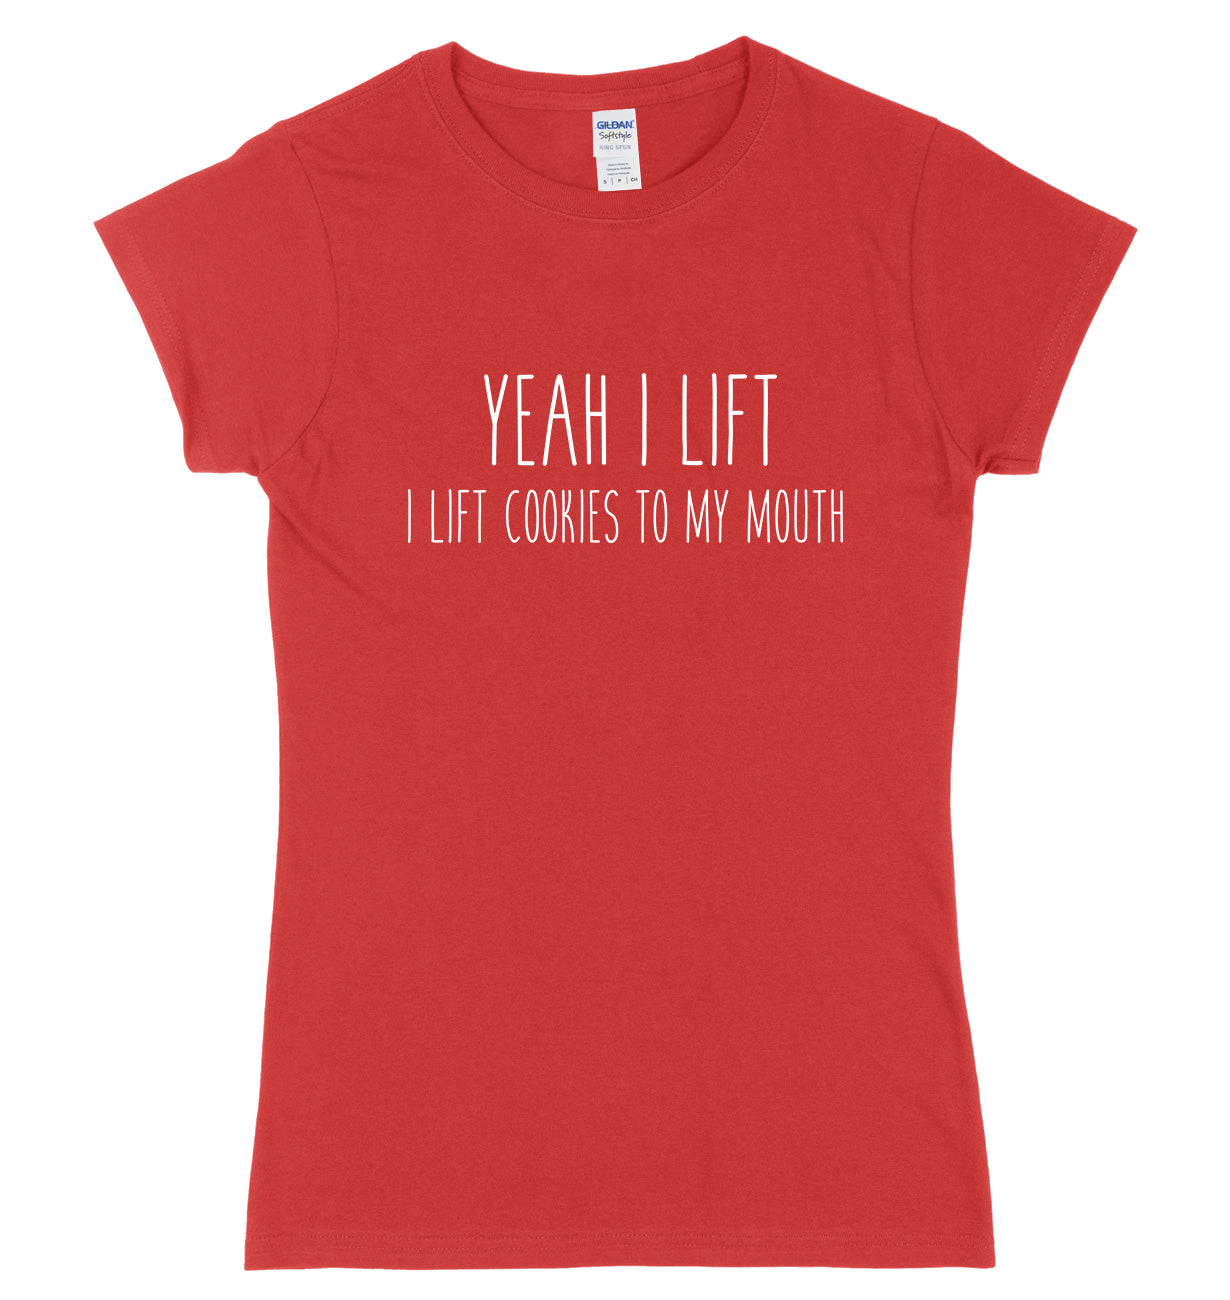 Yeah I Lift. I Lift Cookies To My Mouth Womens Ladies Slim Fit T-Shirt